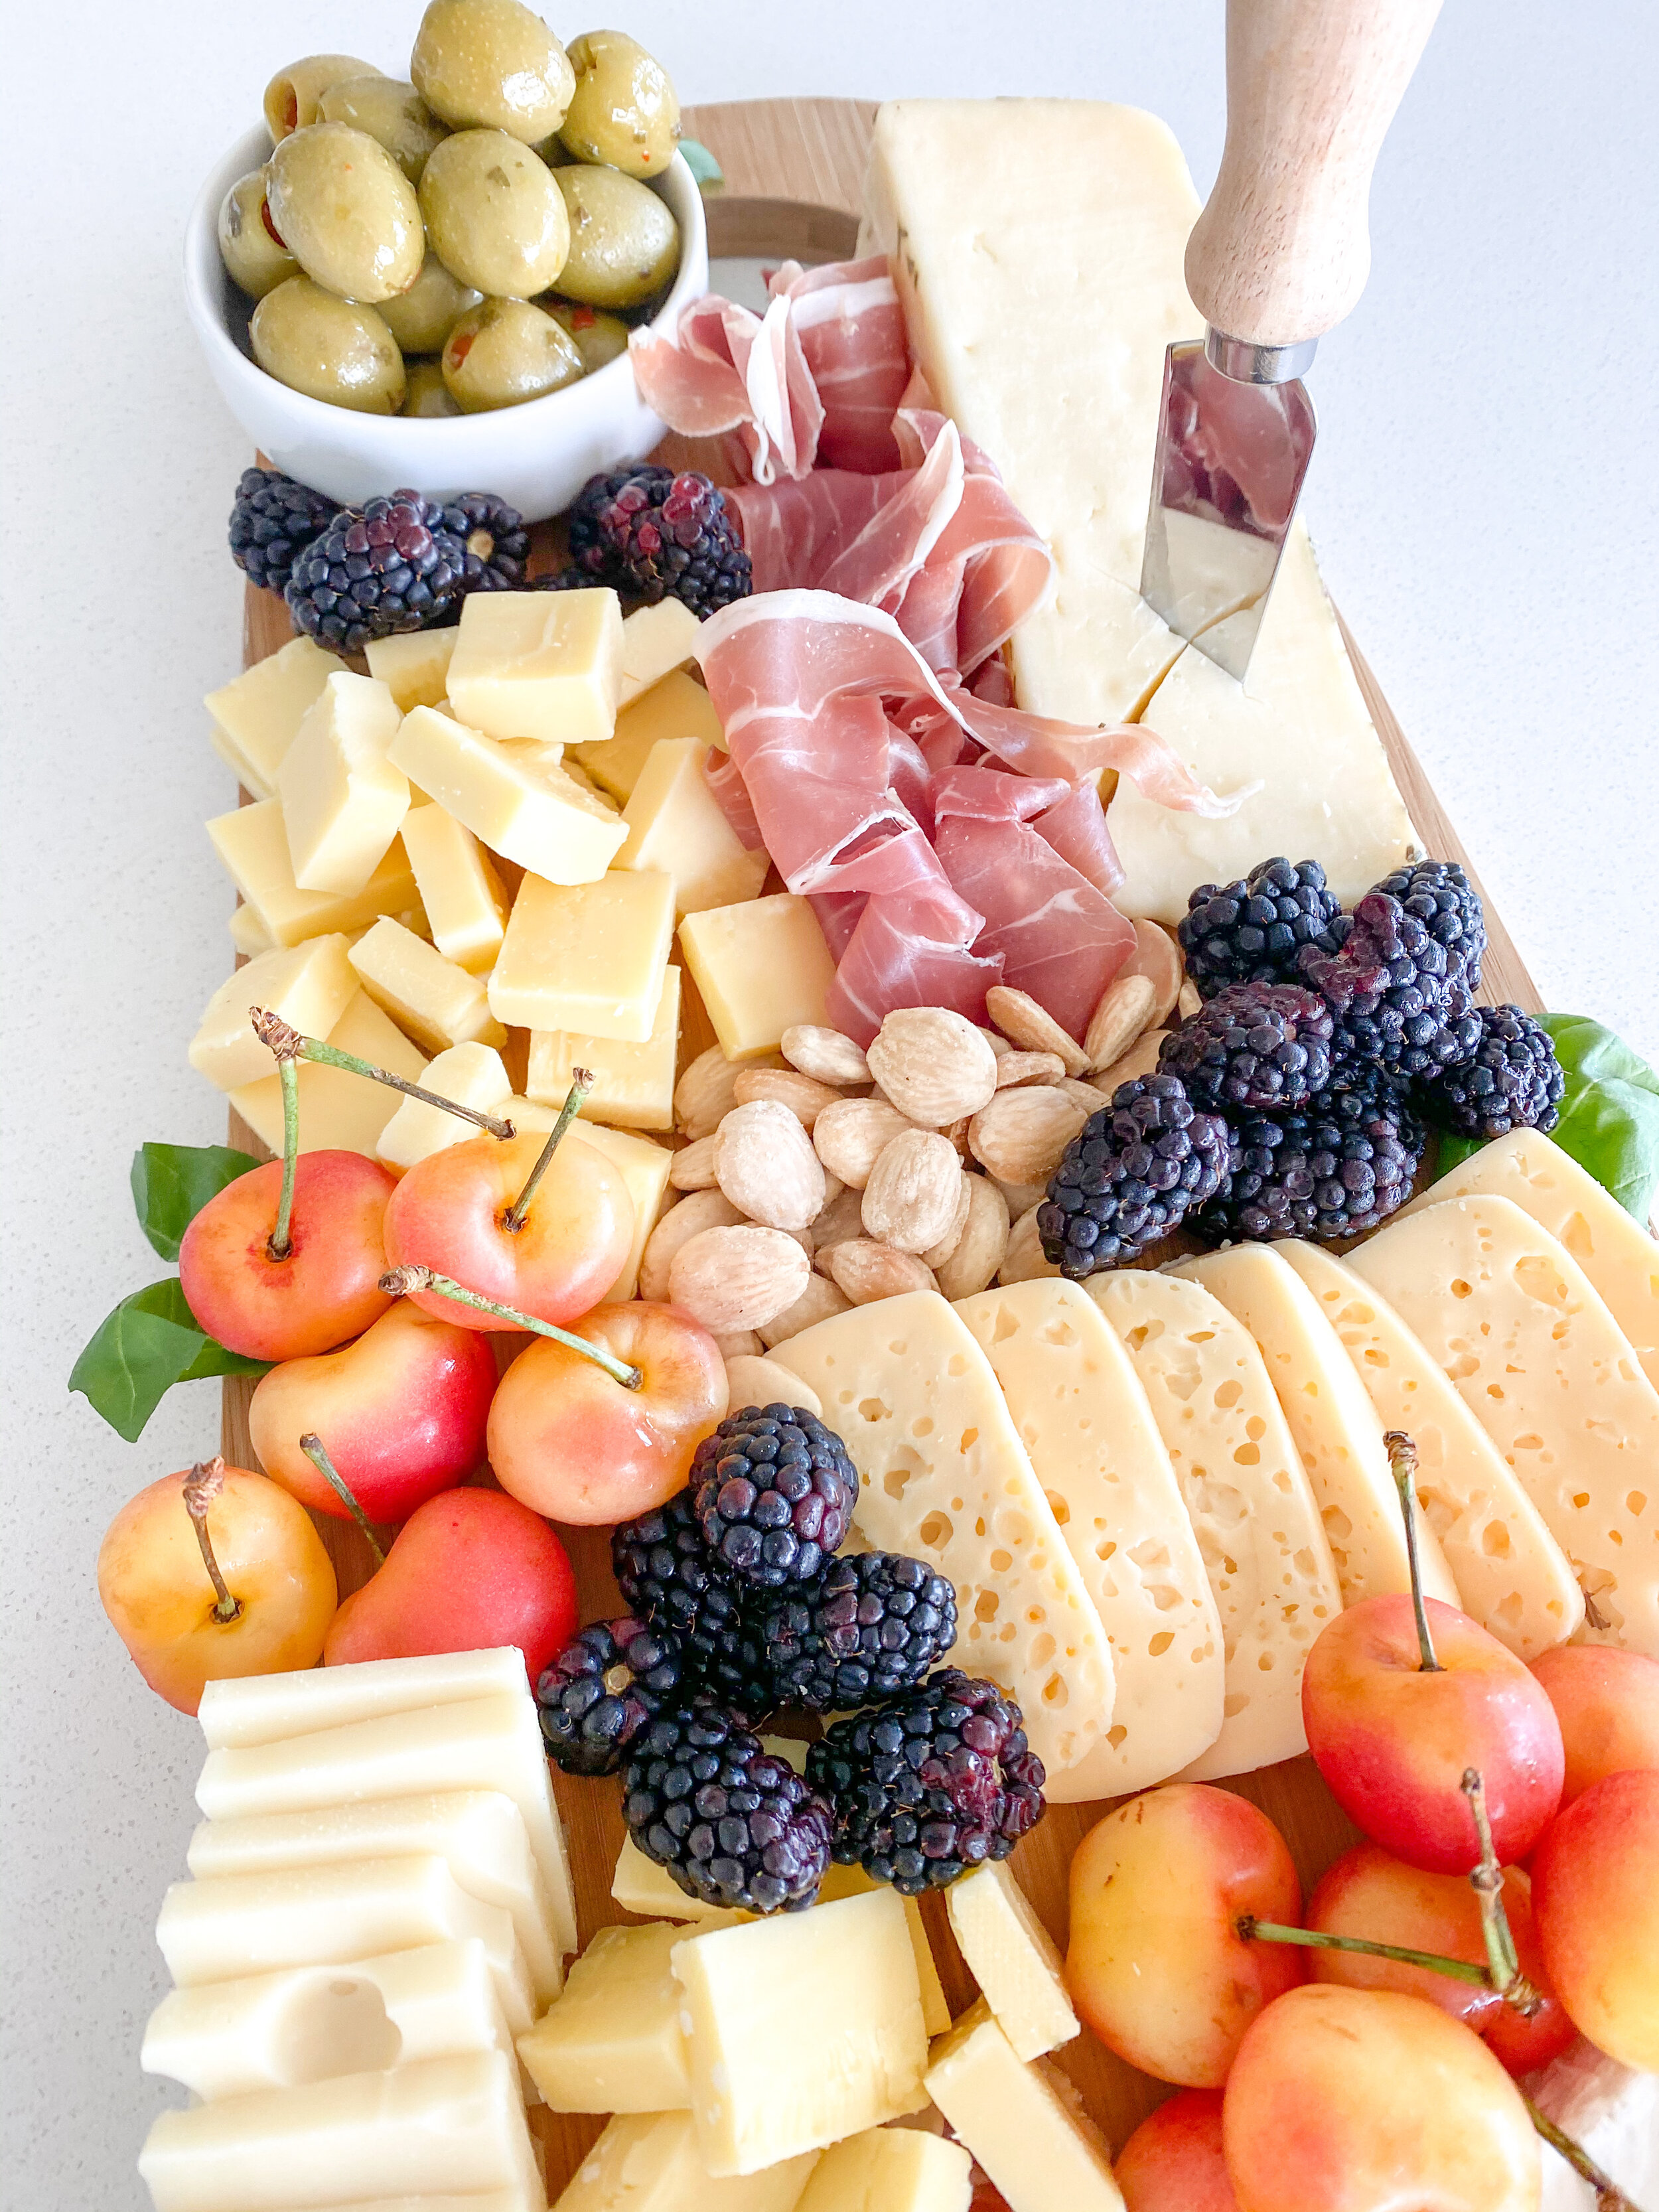 www.tarynintotravel.com | Summer Inspired Charcuterie Board | Cheese Board | Meat and Cheese | Fruit | Cheese Honey | Easy Charcuterie Board